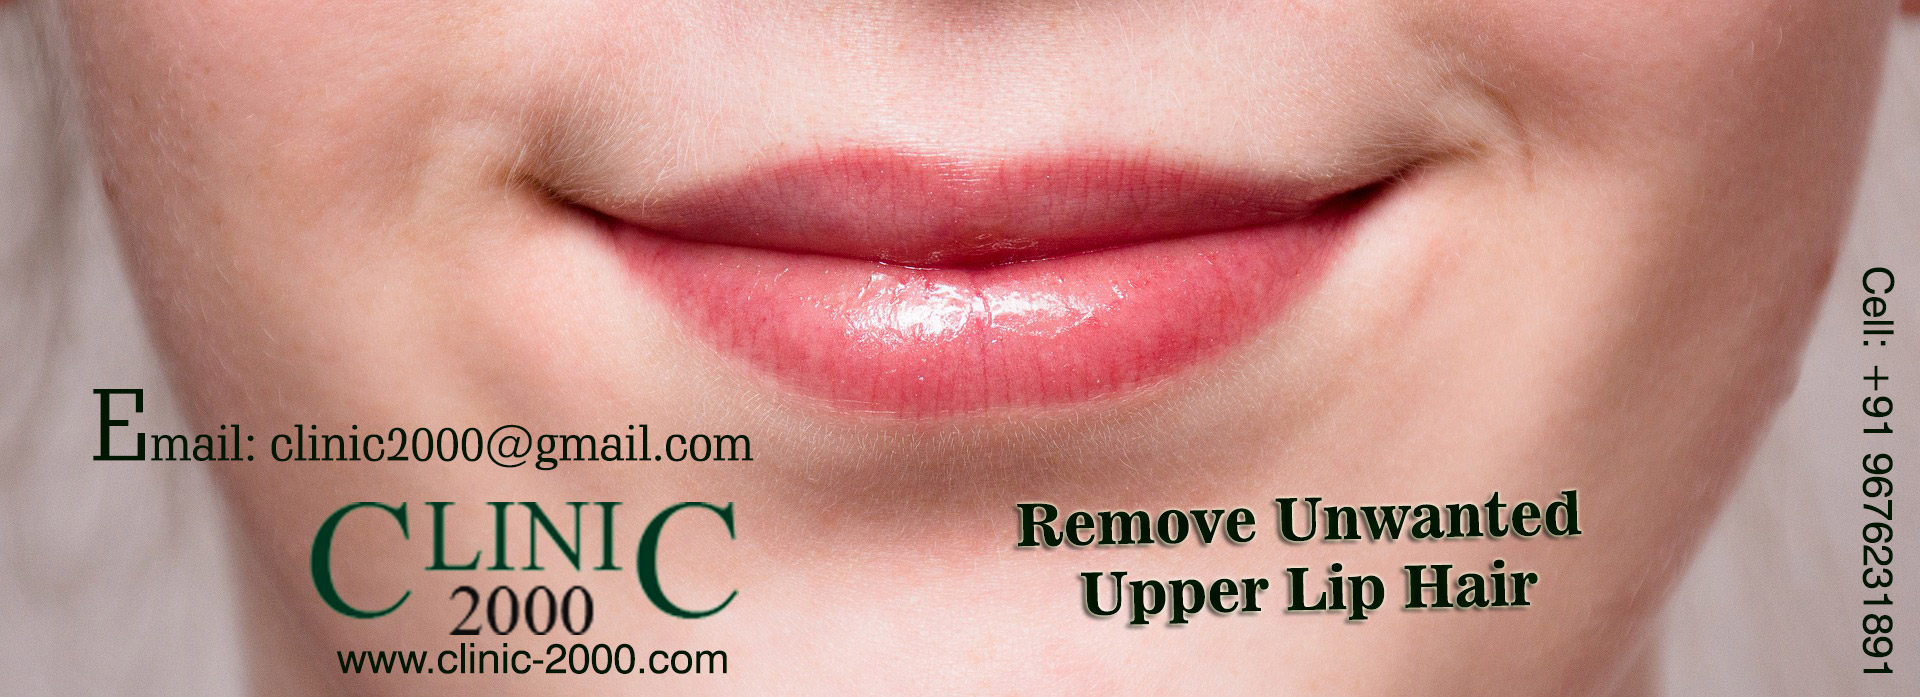 How to Remove Upper Lip Hair